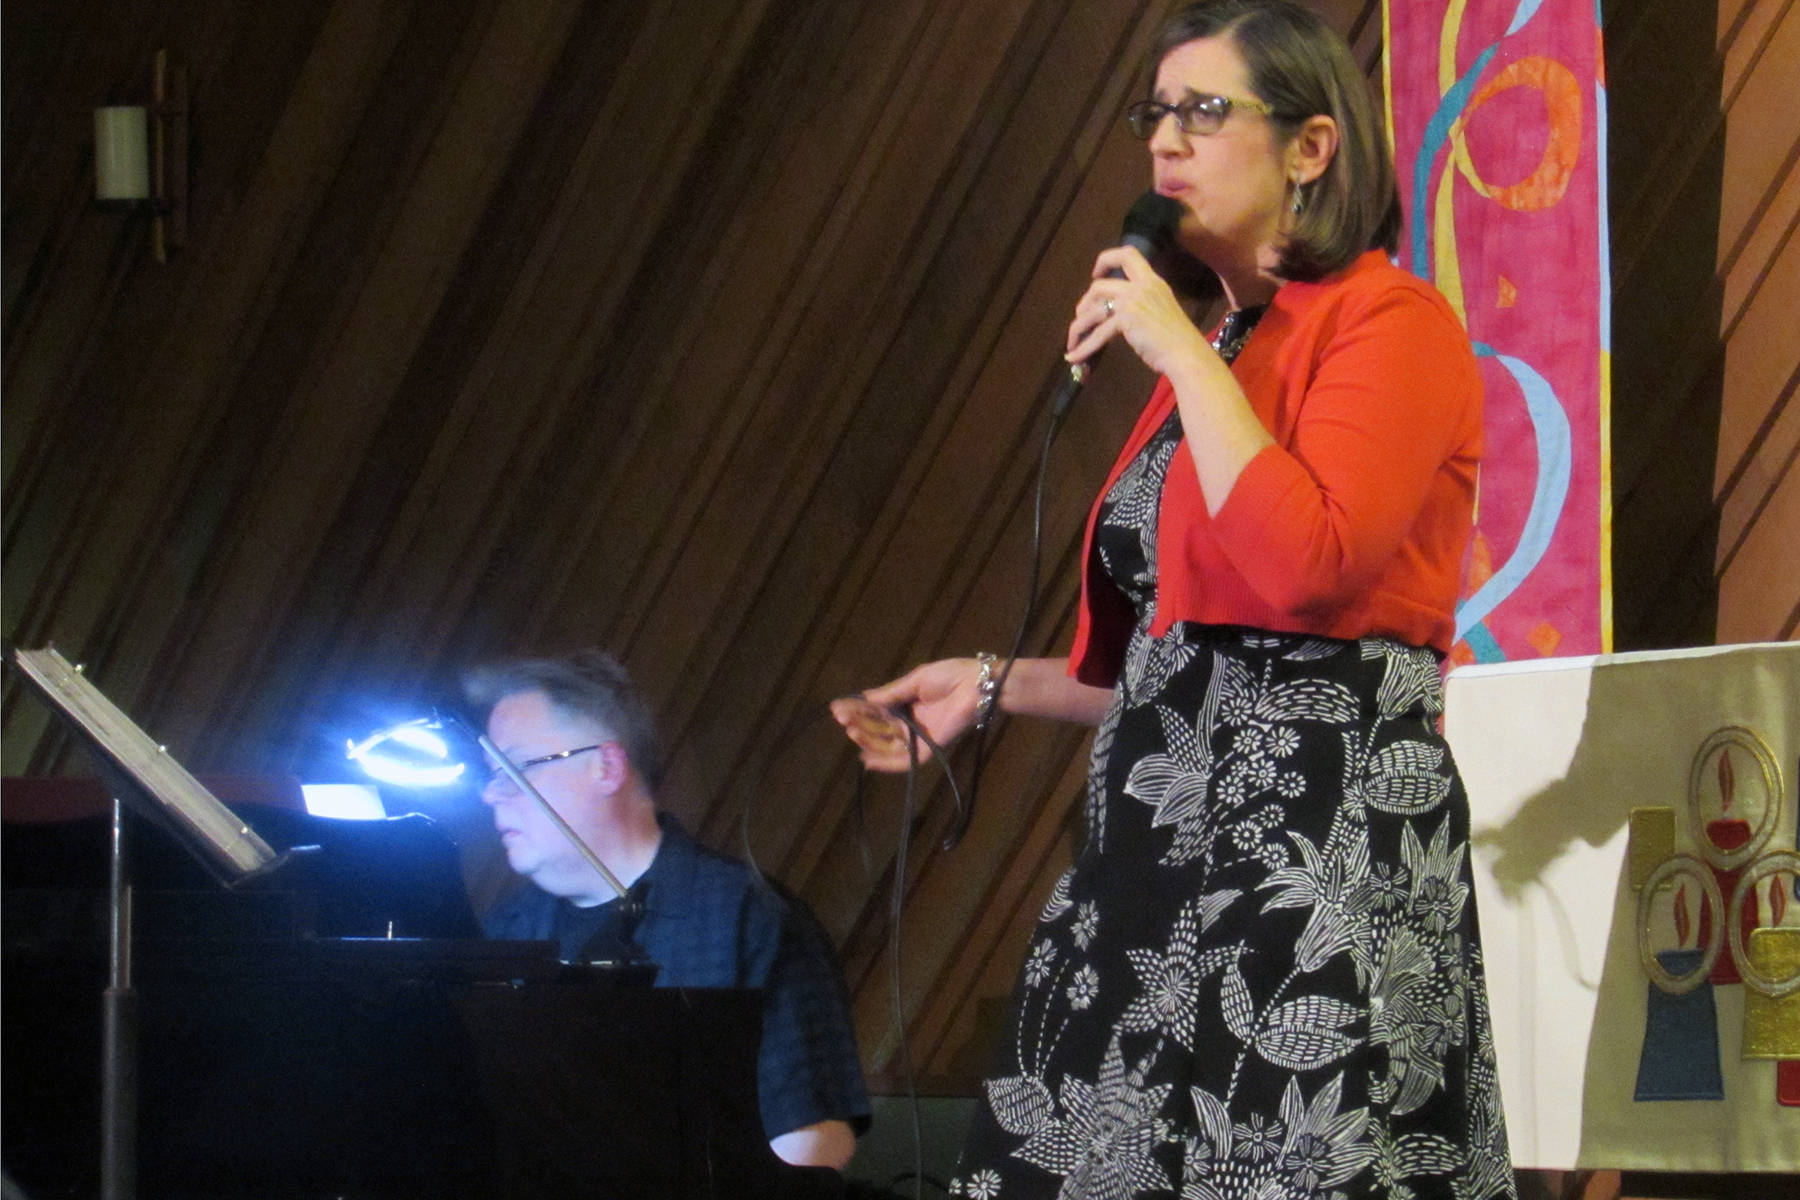 Heather Mitchell sings while accompanied by Tom Locher on piano at a Nov. 3 Gold Street Music Concert.. Locher and Mitchell will also perform during upcoming Juneau Cabaret concerts. (Ben Hohenstatt | Capital City Weekly)